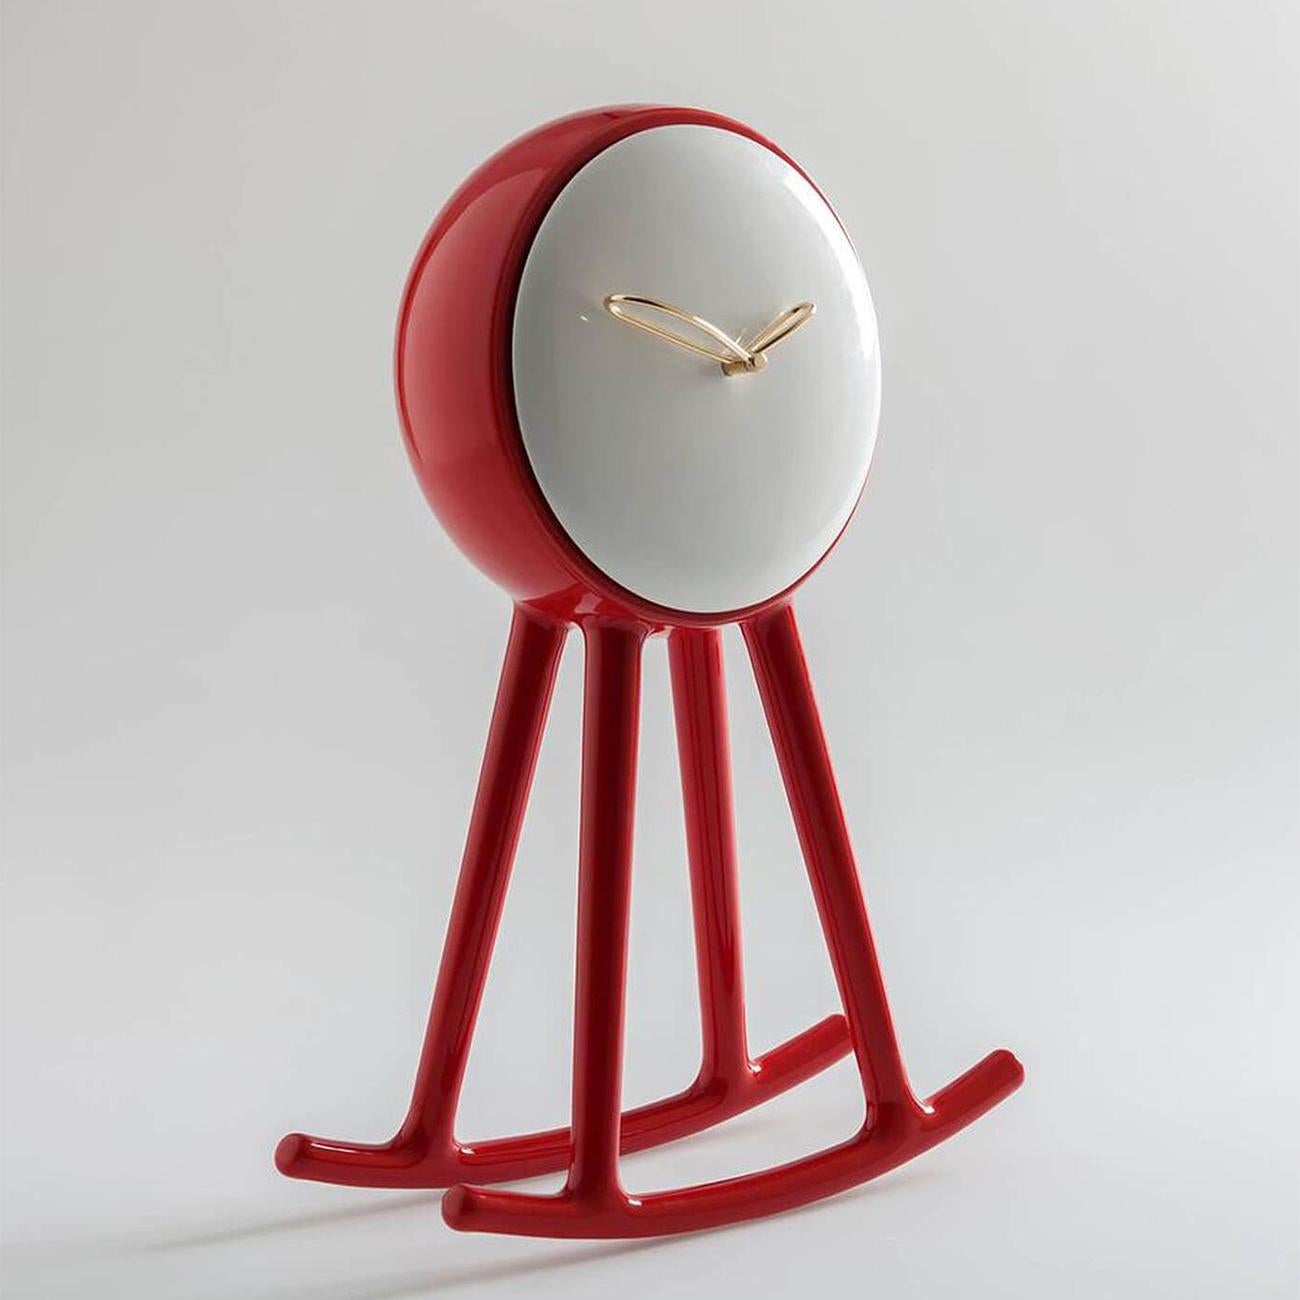 Clock Pendule Red with structure 
in ceramic in glazed finish and with 
clear glass.